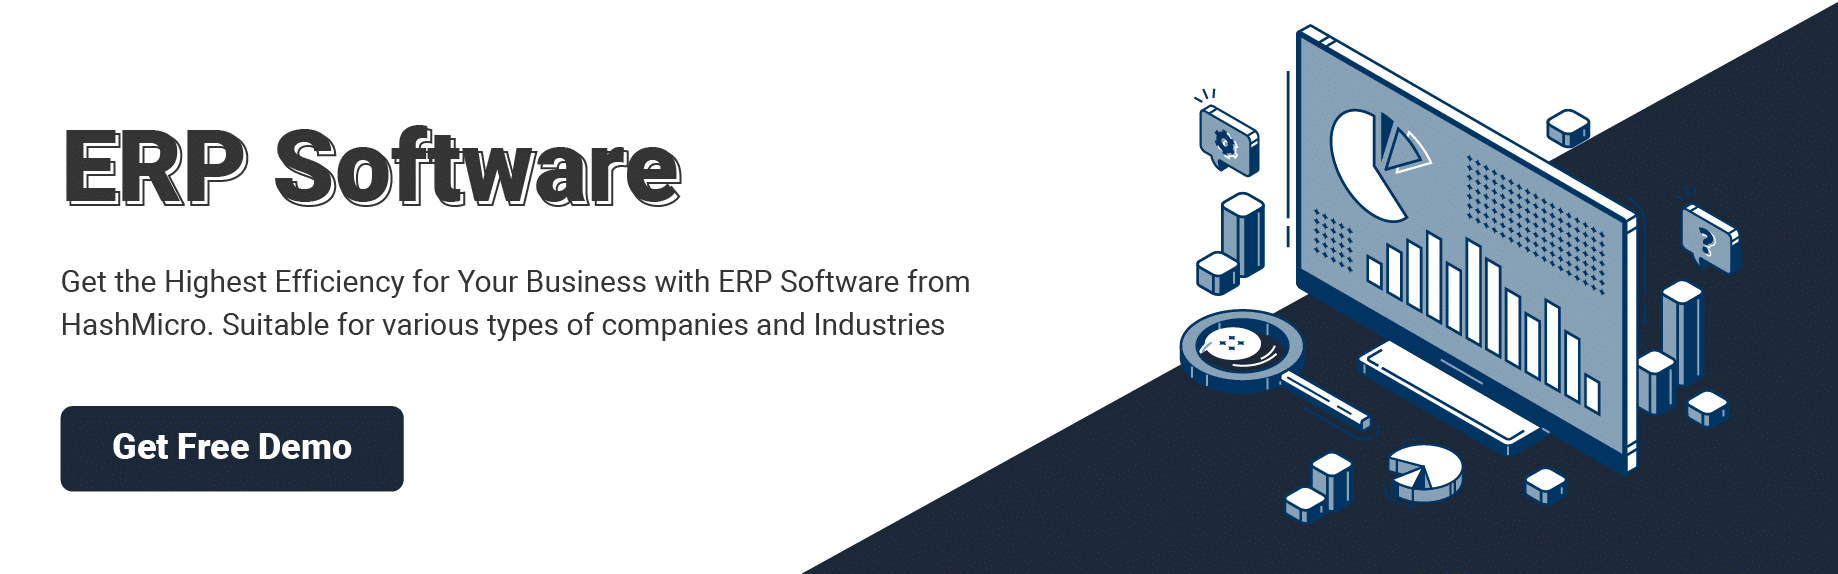 ERP Software examples